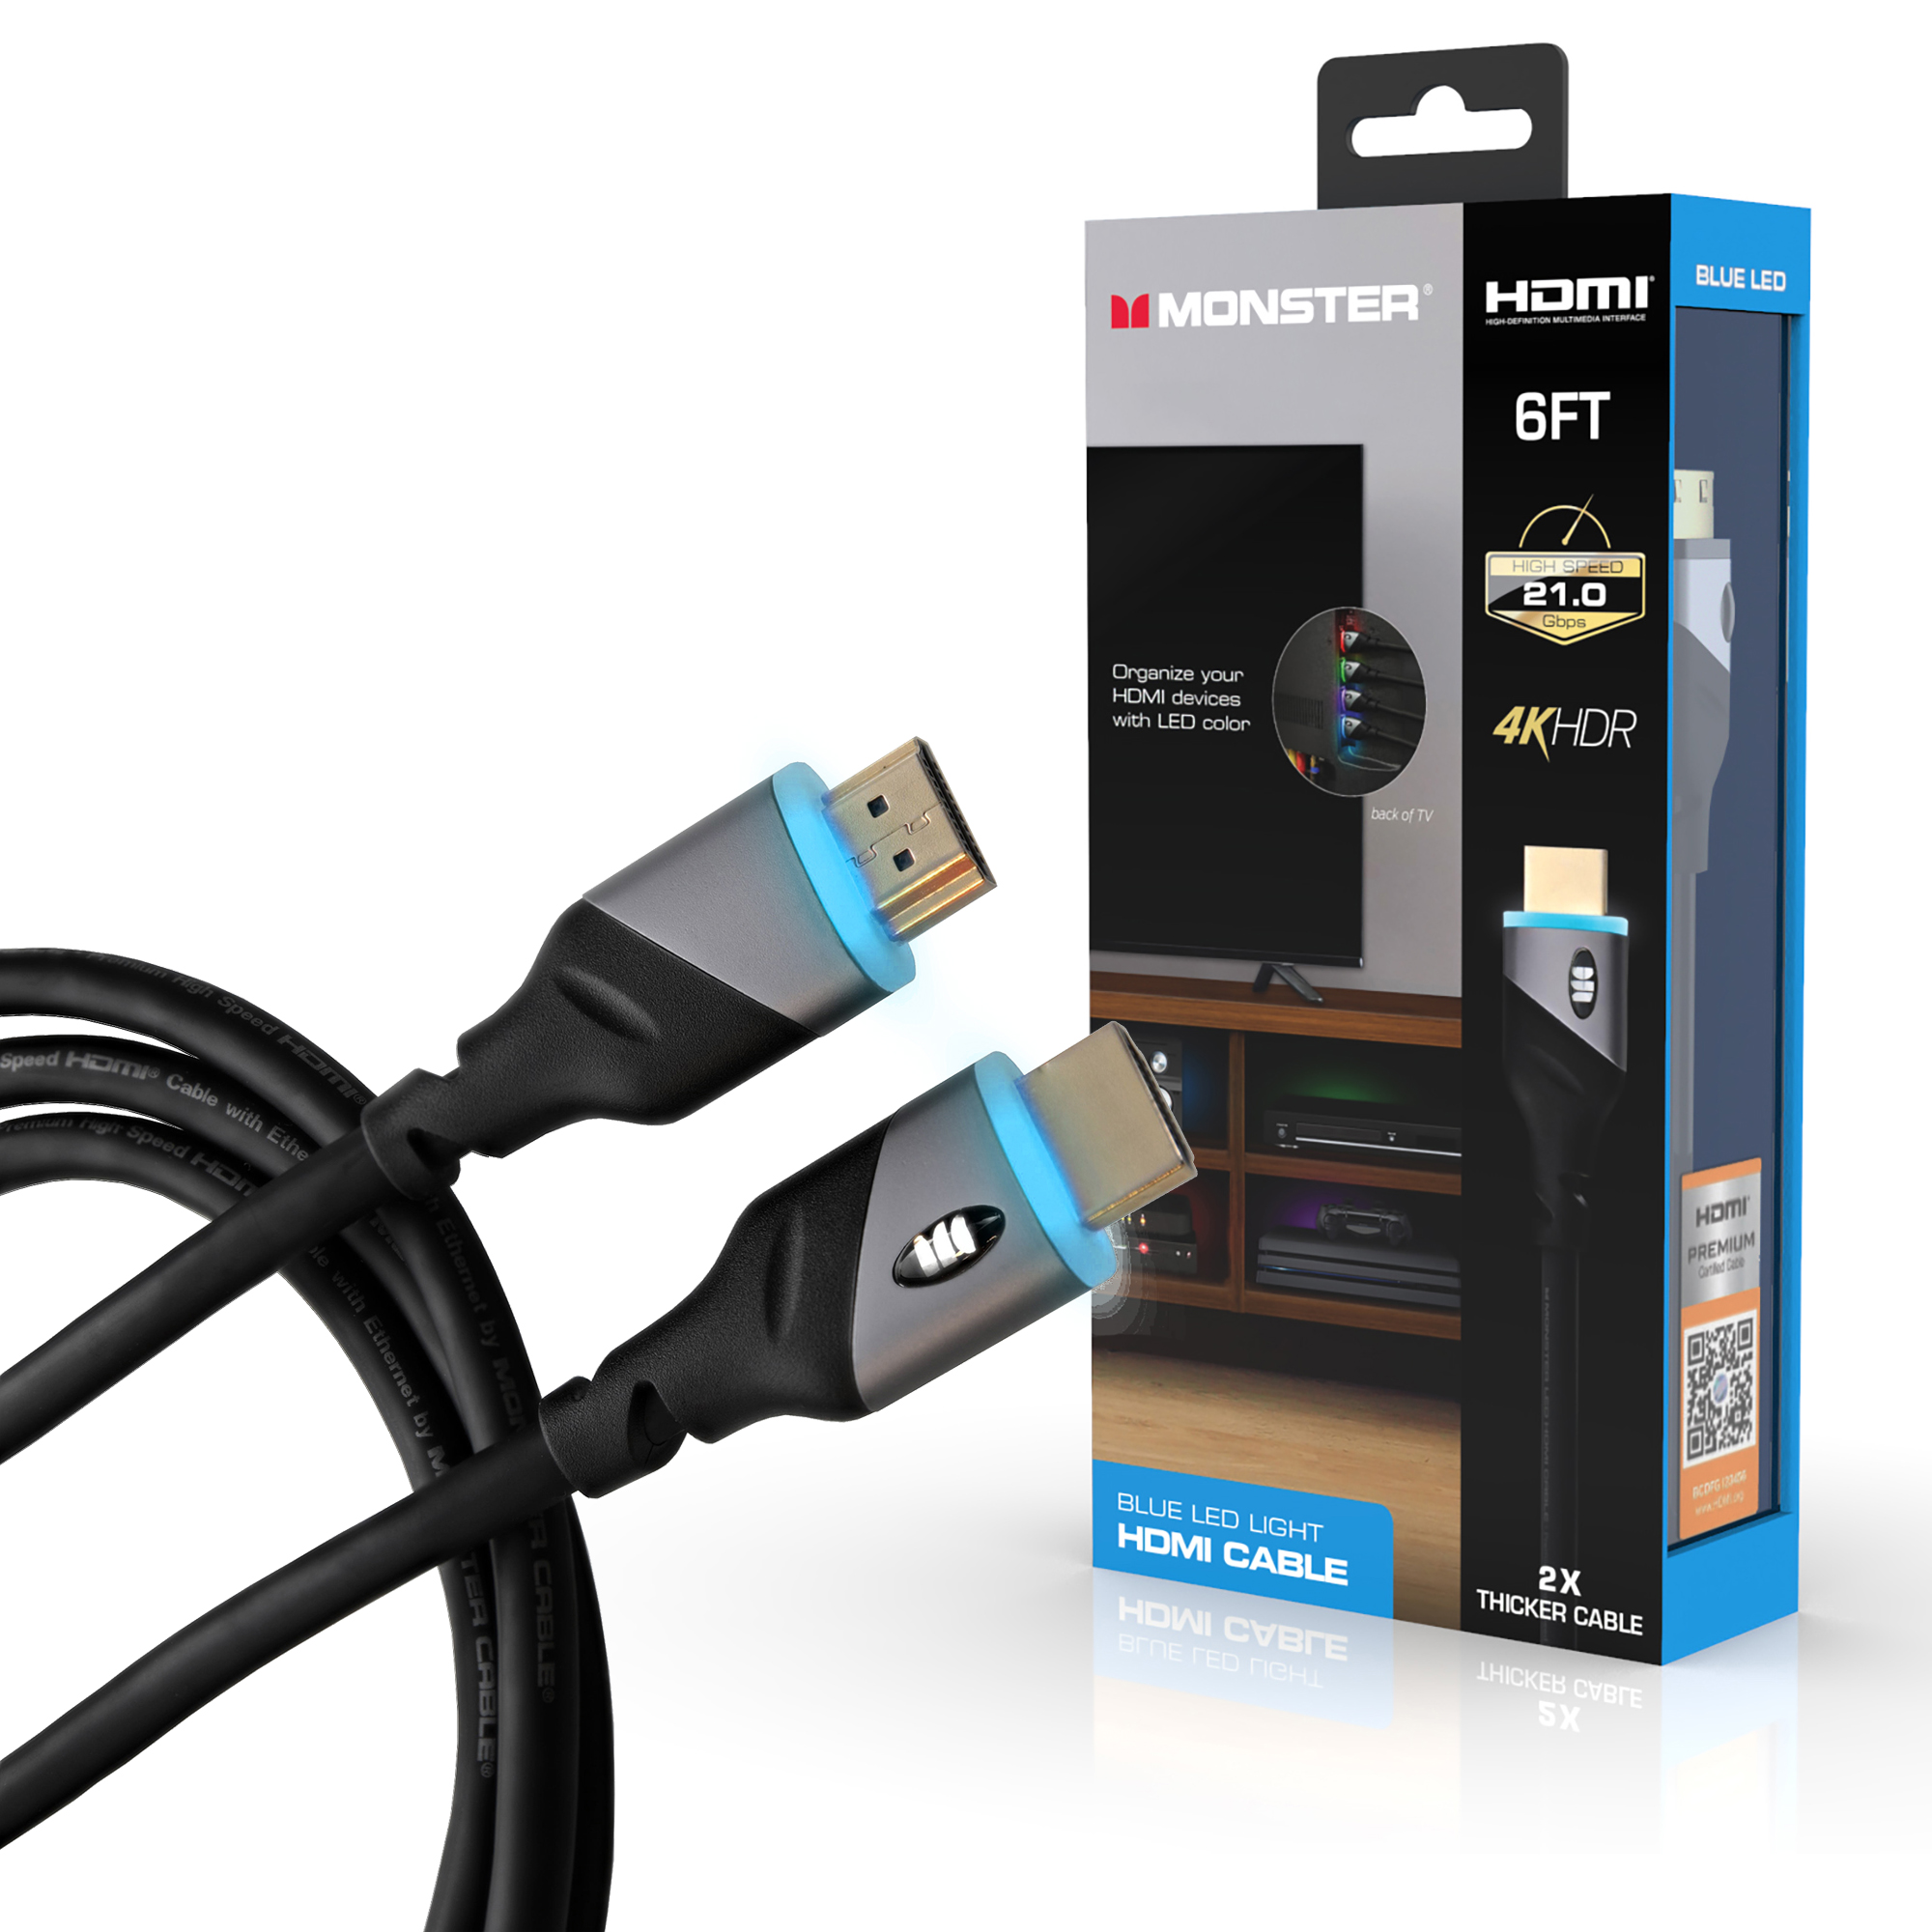 Select Walmart Stores: 6' Monster High Speed 4K HDR HDMI Cable $1.00, $1.50, $3.00 (YMMV -IN-STORE ONLY)